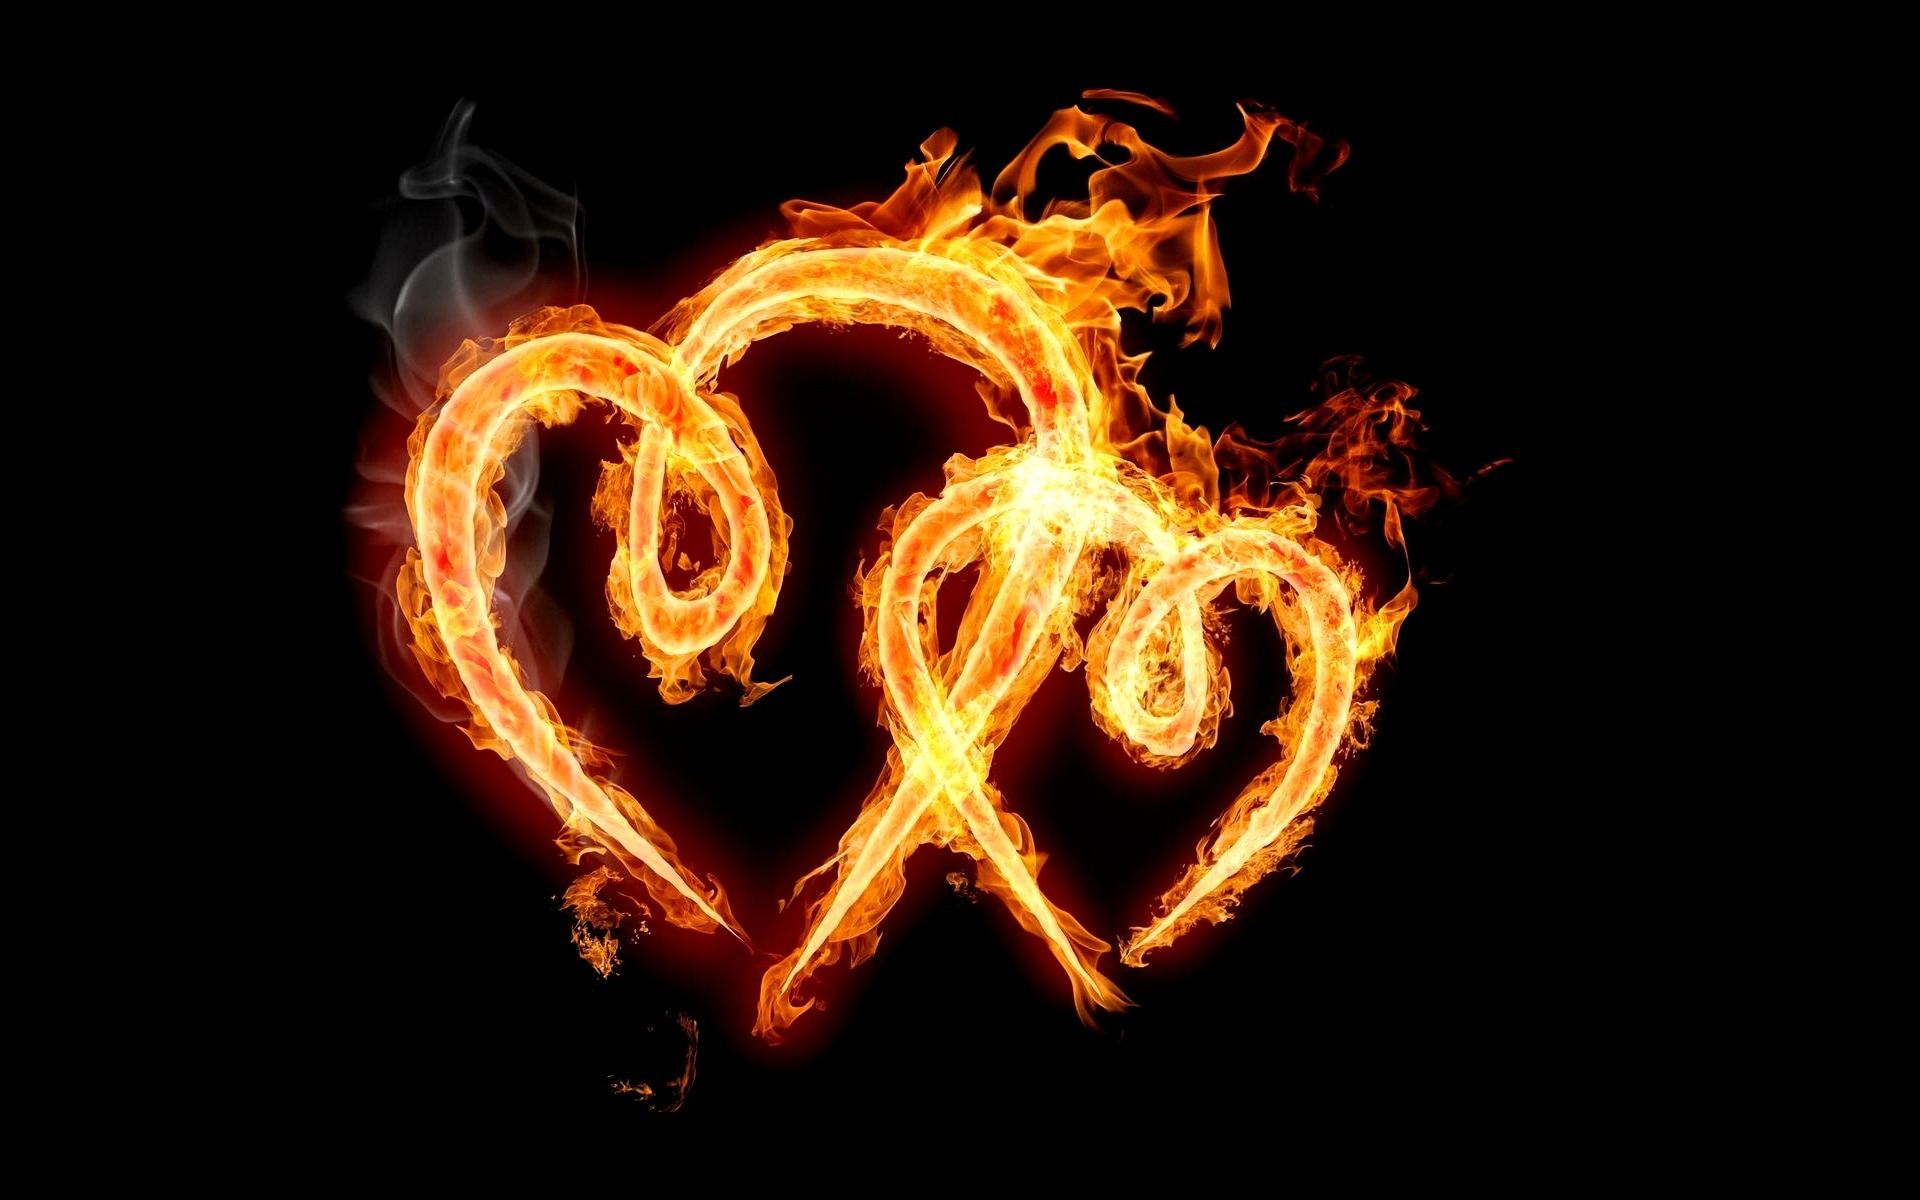 Flaming Hearts on Valentine's Day February 14 wallpapers and images